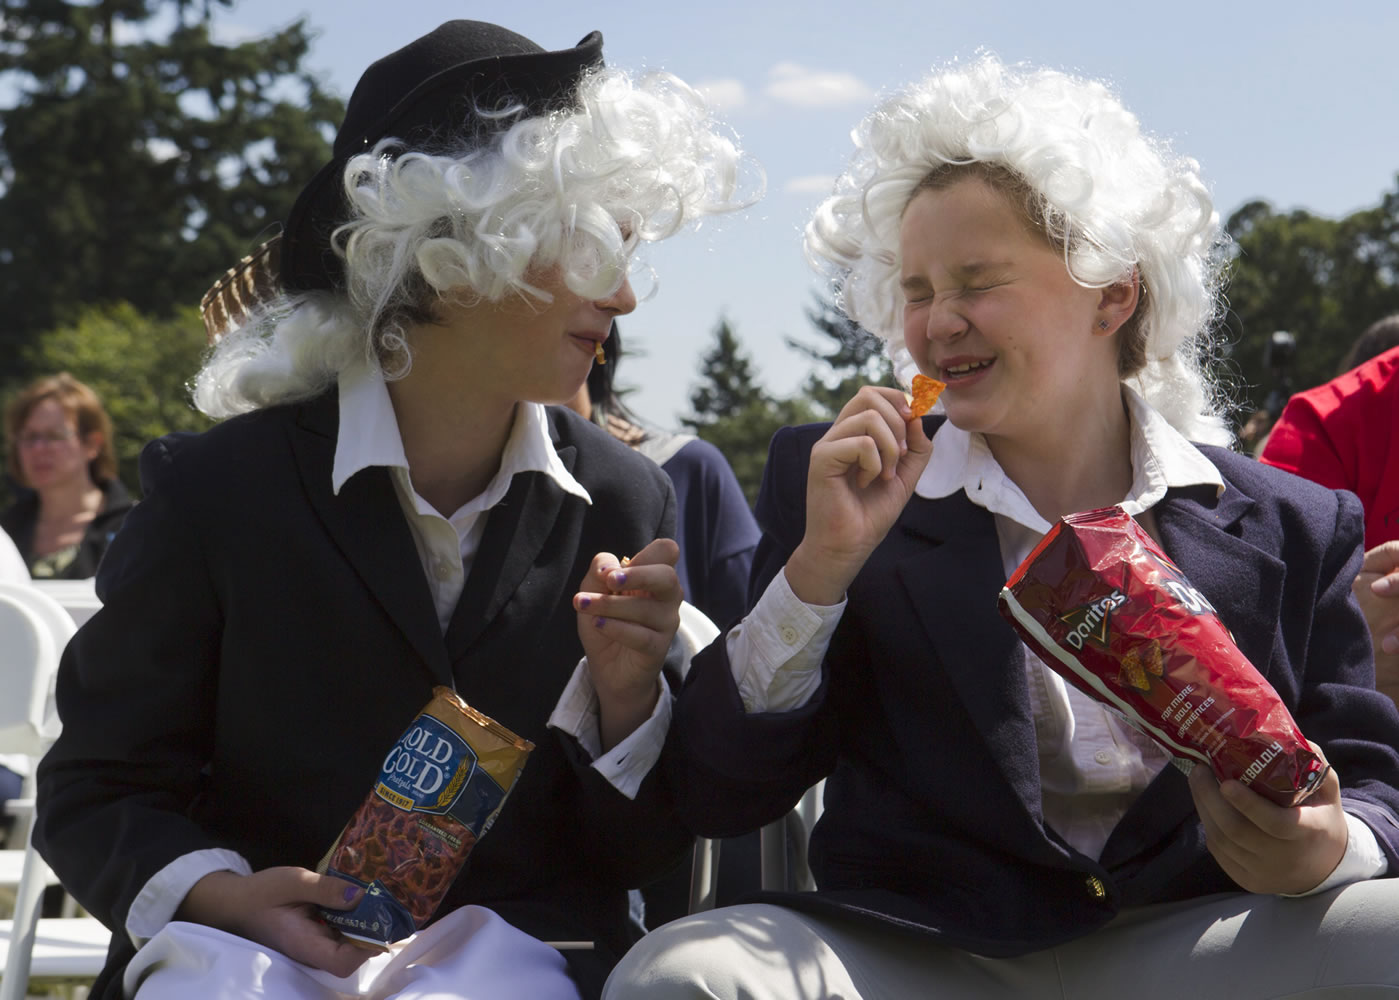 Emalee Weaver, left, draws a laugh from Camryn Jurcich during Flag Day at Fort Vancouver. Weaver, dressed as Robert Livingston, and Jurcich, portraying John Adams, helped give a history lesson on the flag during Friday's festivities.